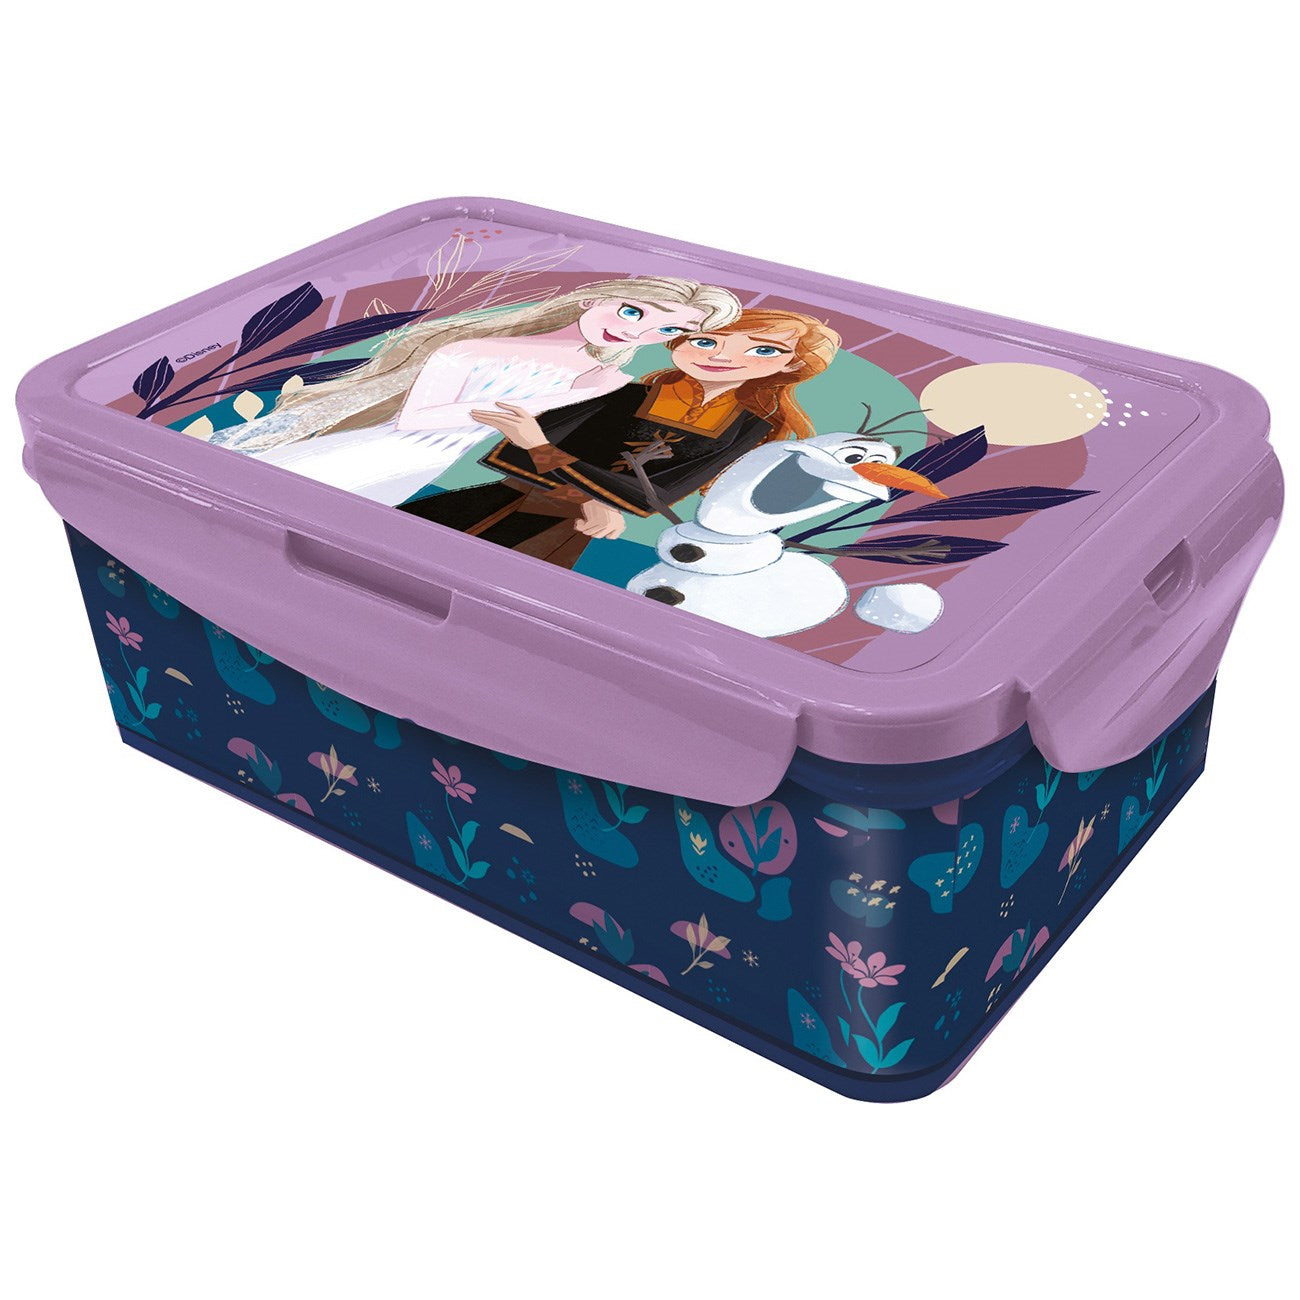 Euromic Large Disney Frozen Lunch Box with Removable Compartments